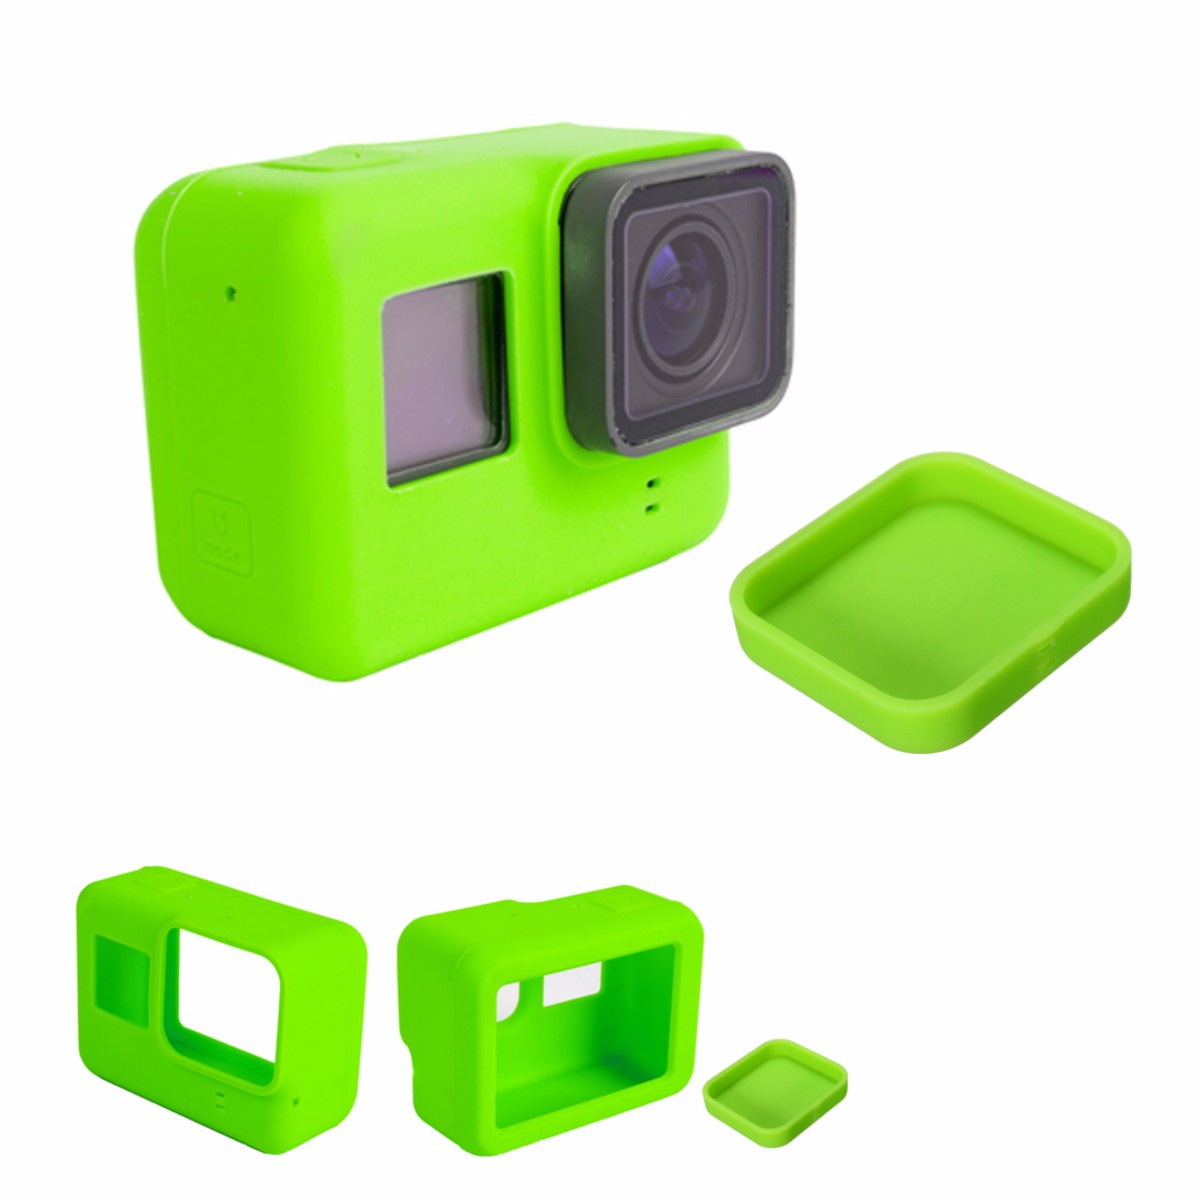 Soft-Silicone-Housing-Case-Protective-Cover-And-Lens-Cap-For-GoPro-Hero-5-Camera-1109058-1